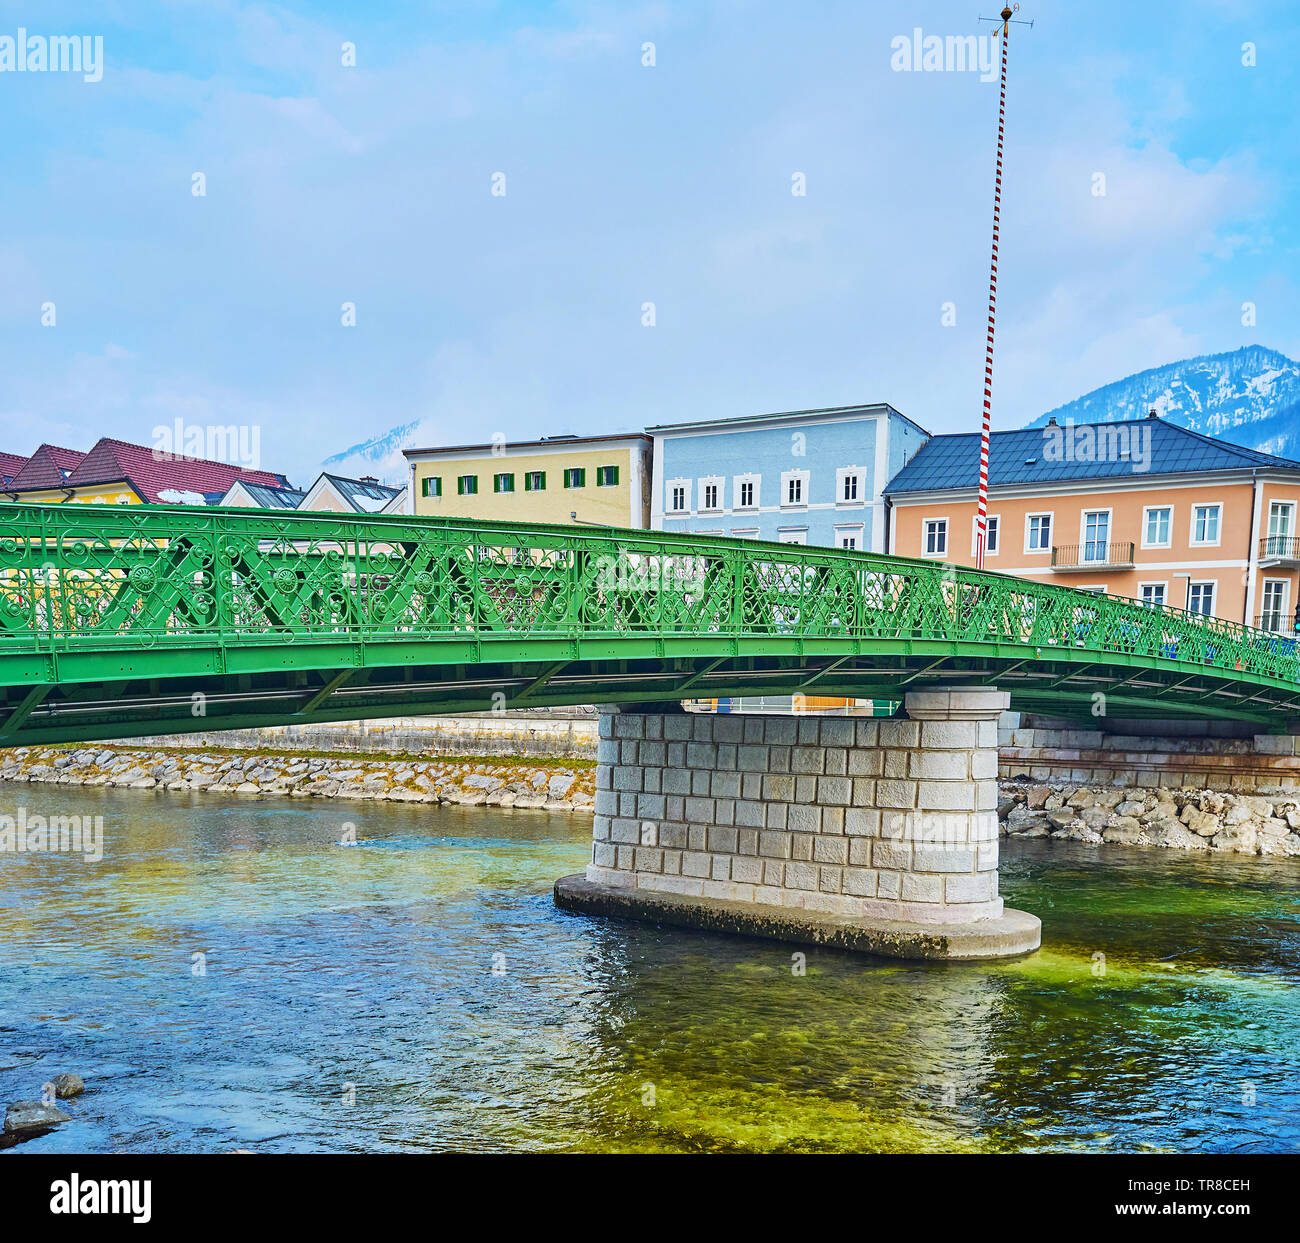 The green lacelike bridge of Kaiserin Elizabeth connects the banks of Traun river and central neighborhoods of Bad Ischl, Salzkammergut, Austria. Stock Photo